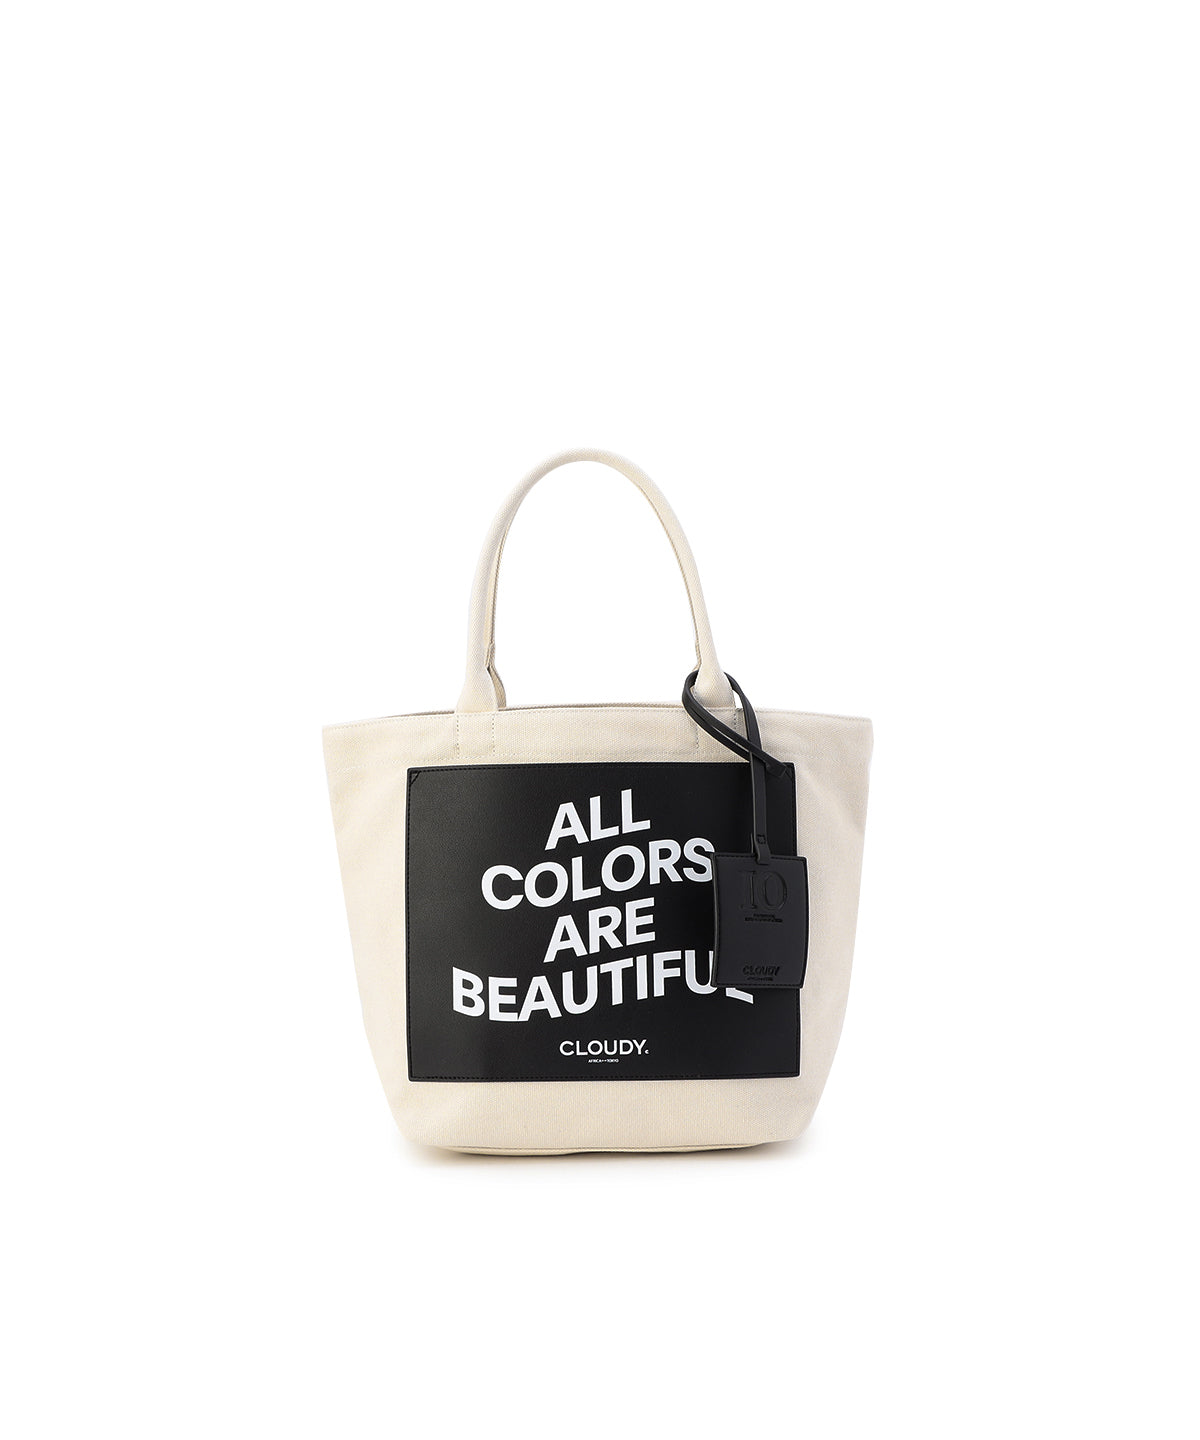 Recycled Canvas Tote (Medium) BLACK | バッグ | CLOUDY公式通販サイト